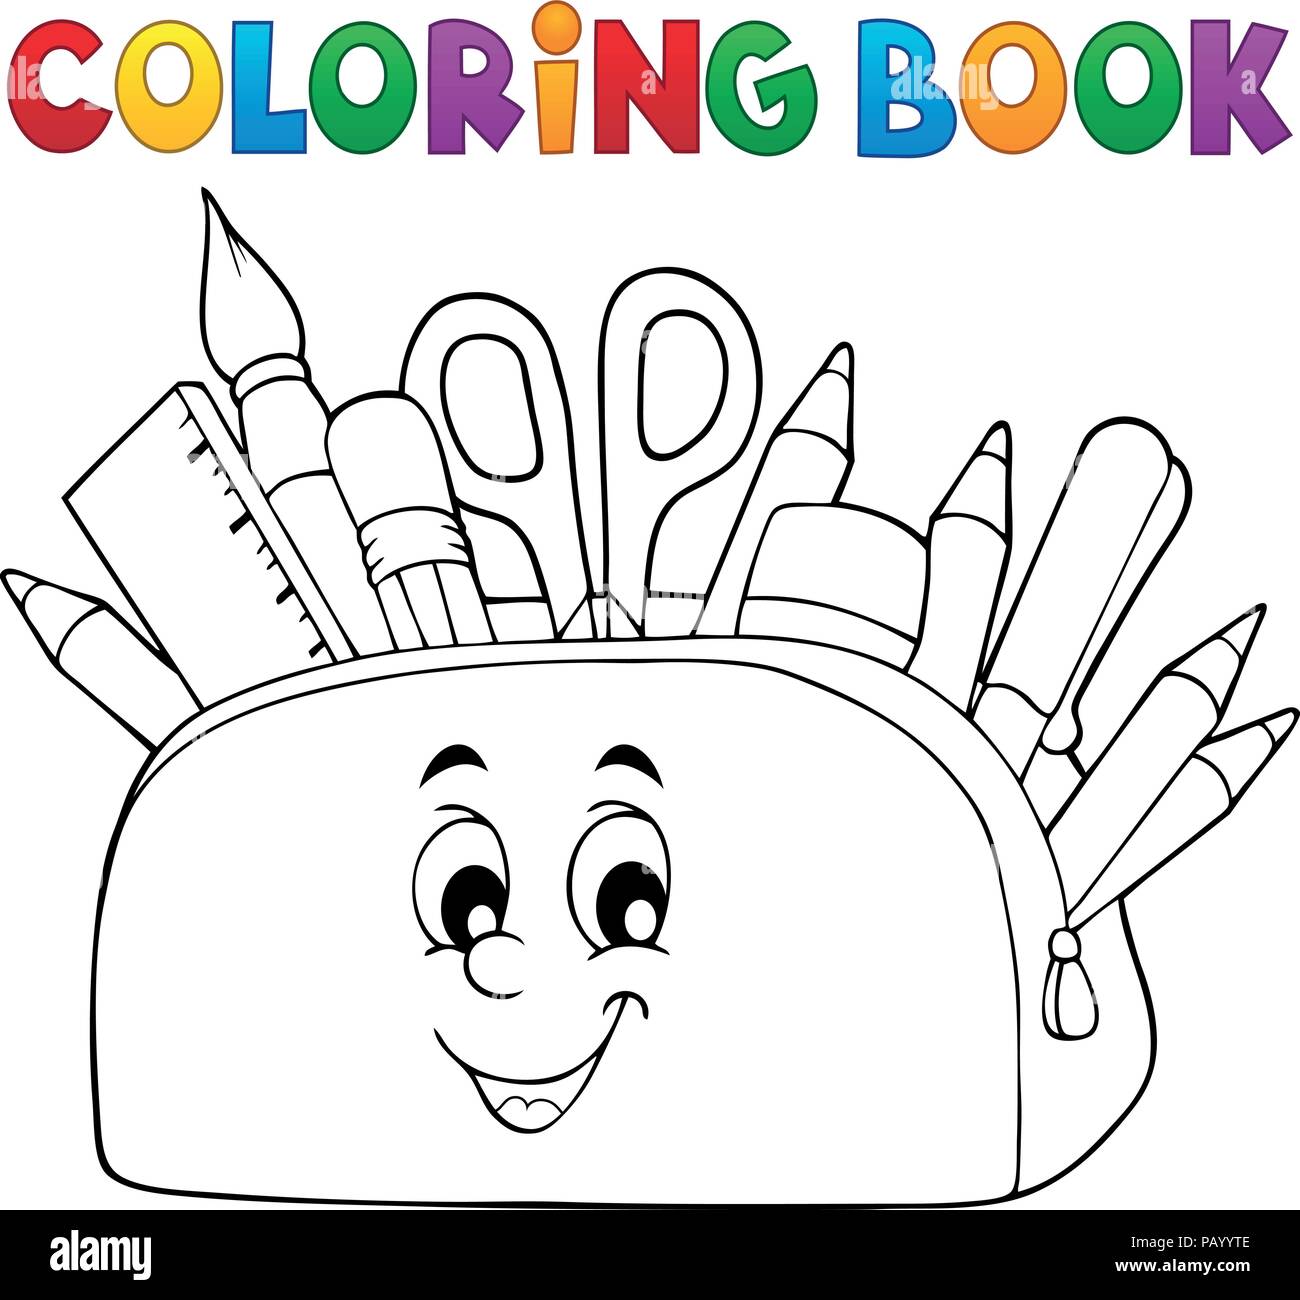 https://c8.alamy.com/comp/PAYYTE/coloring-book-pencil-case-theme-2-eps10-vector-illustration-PAYYTE.jpg